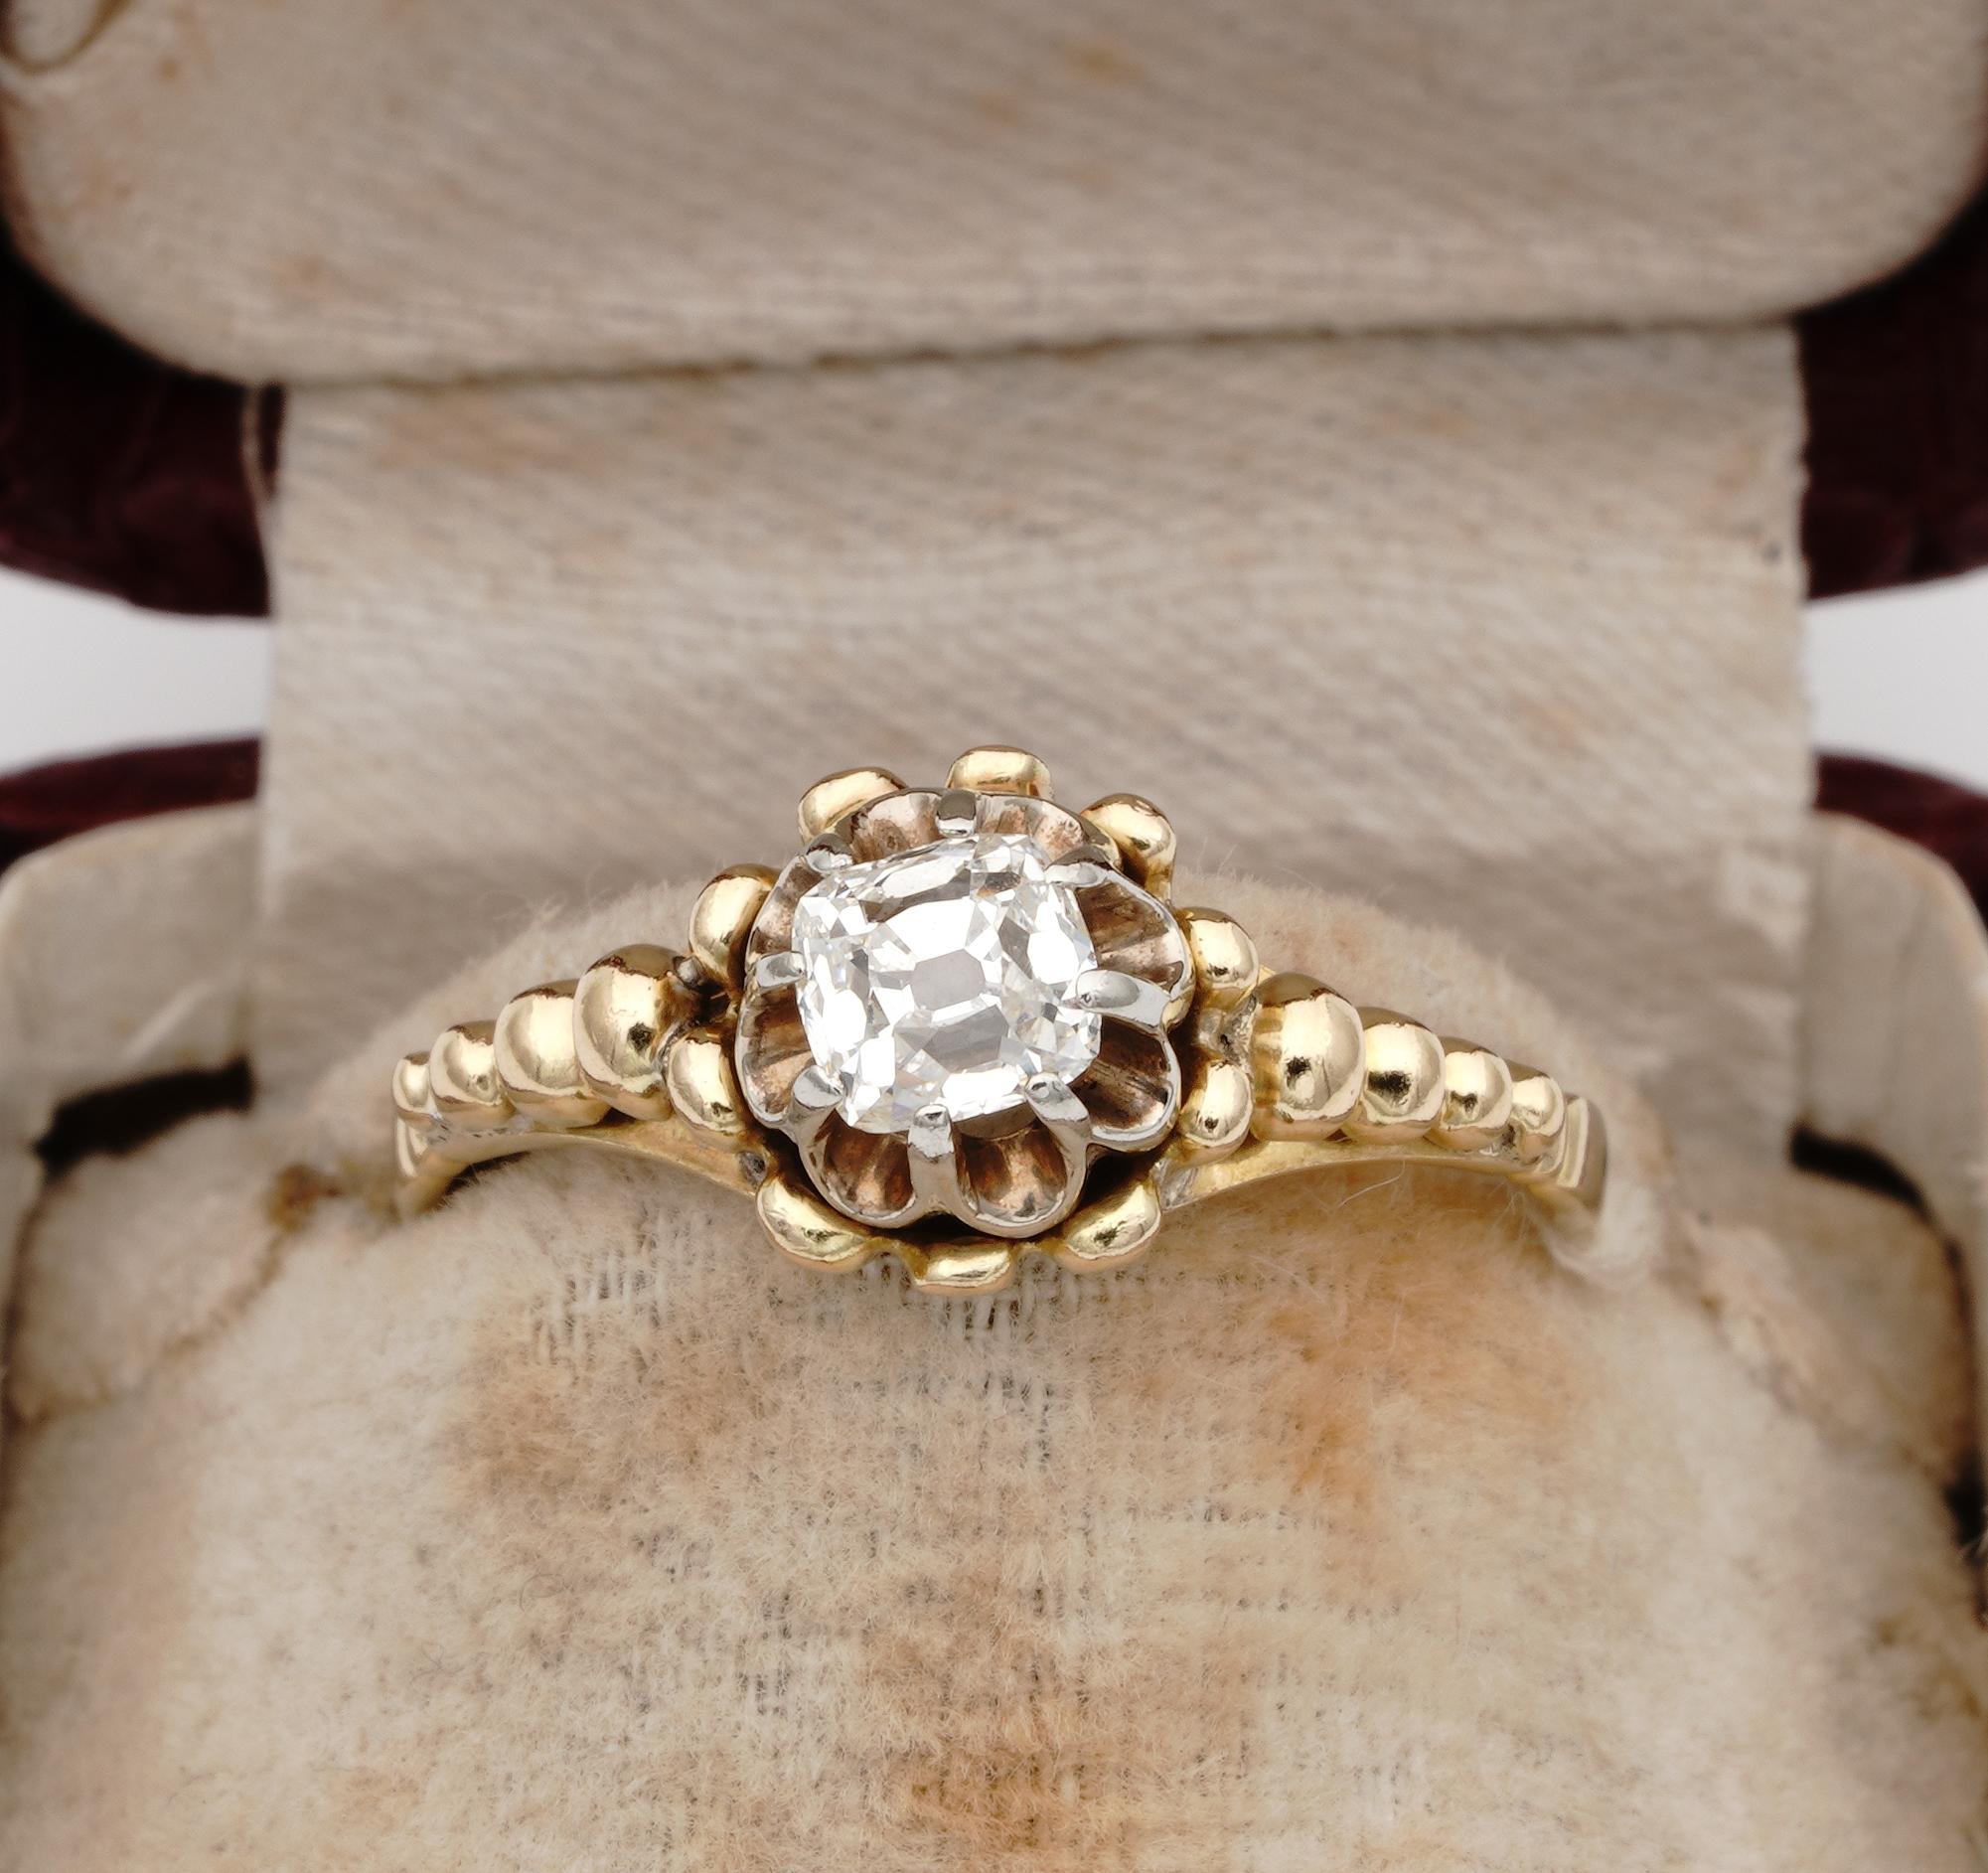 Glorious Victorian!
This absolutely unique genuine Victorian ring is 1890/1900 ca
Outstanding, distinctive design made for the mounting which is a beauty its-own
Marvellous Victorian workmanship highly decorated with heavy 18 KT solid gold